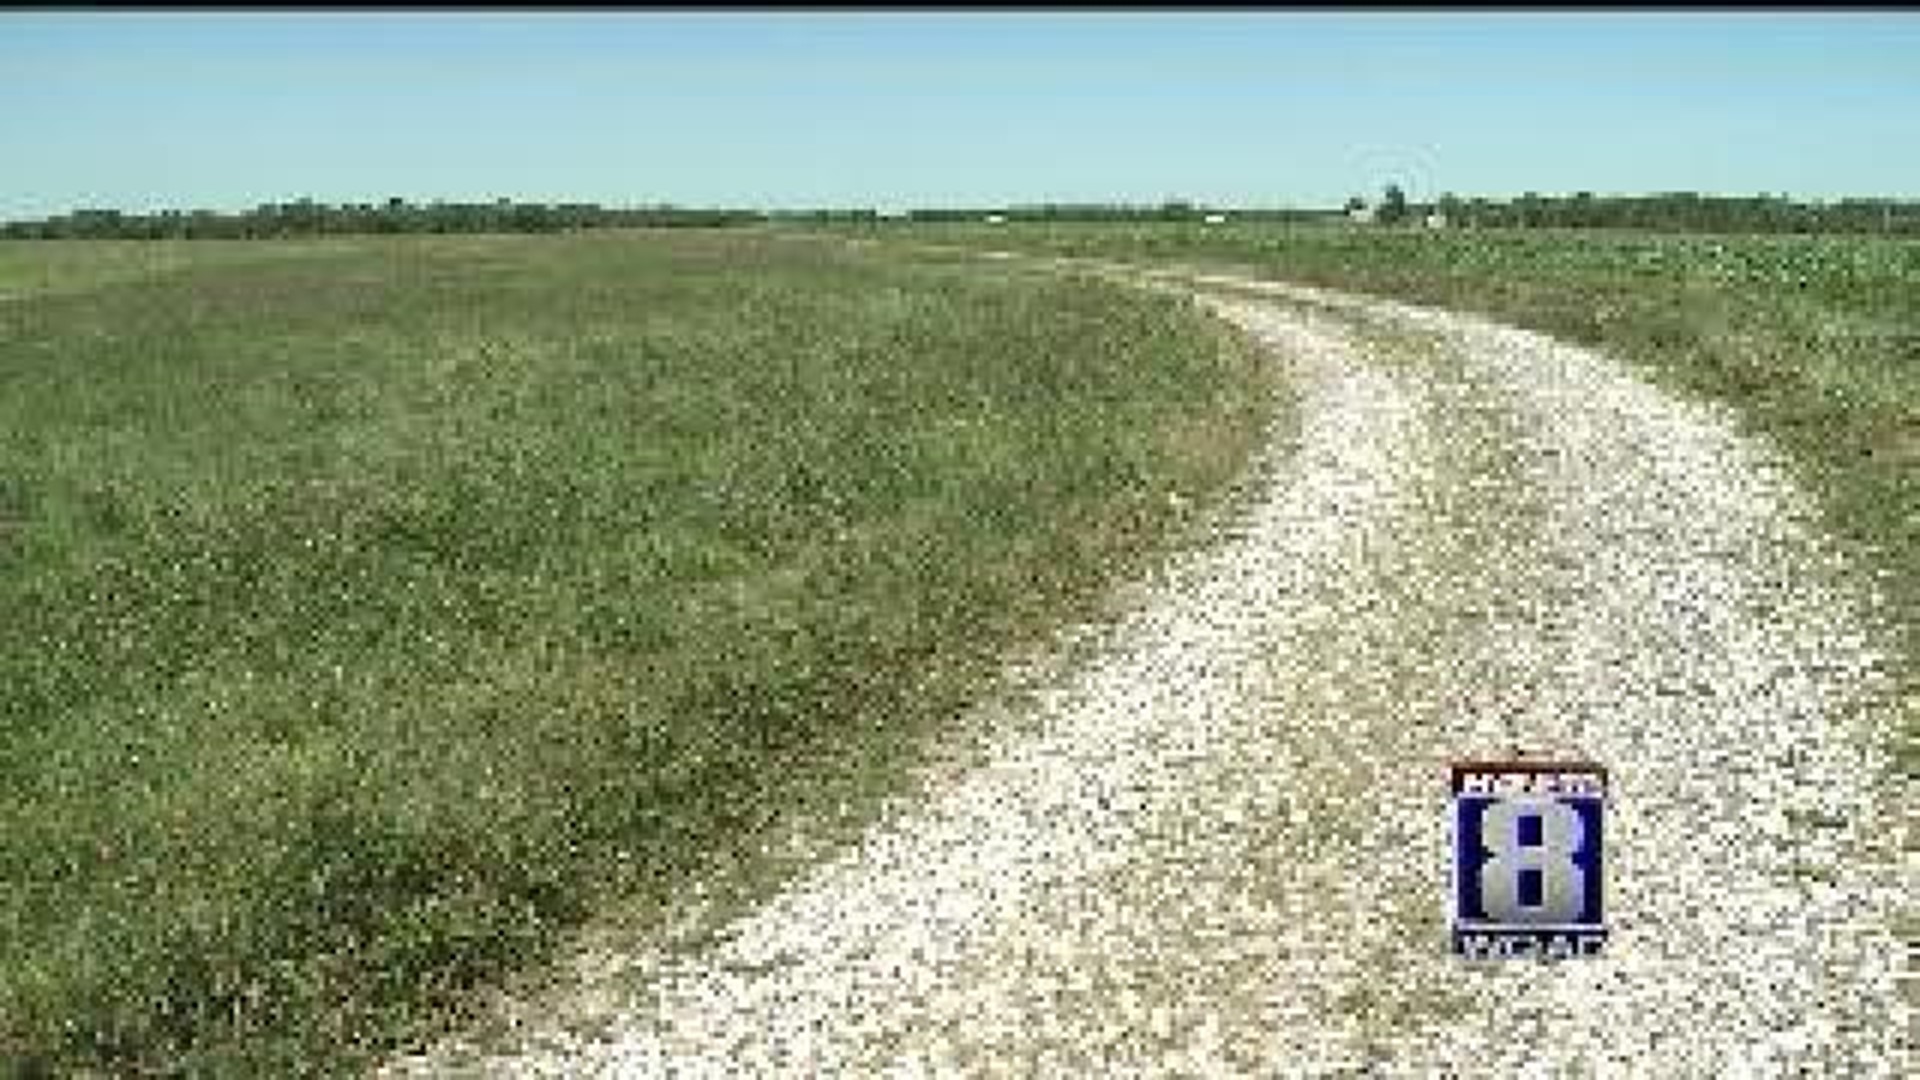 Mercer County private air strips targeted